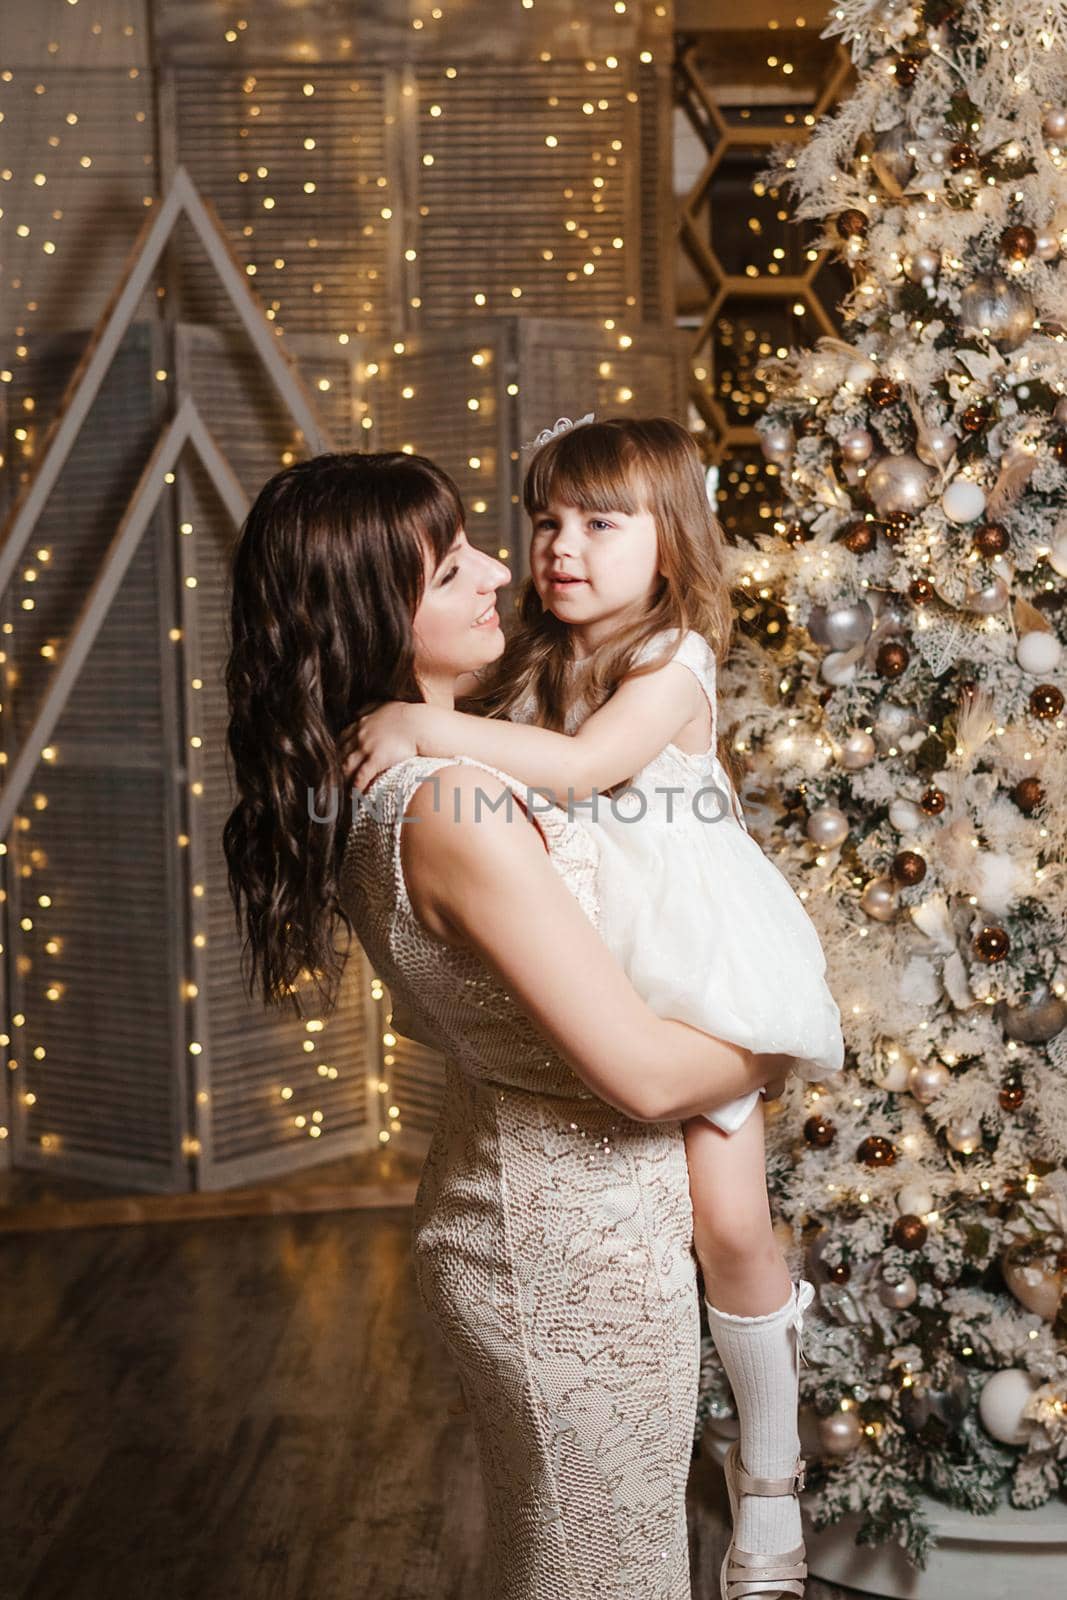 A little girl with her mother in light festive dresses next to the Christmas tree. The theme of New Year's holidays and festive interior with garlands and light bulbs by Annu1tochka